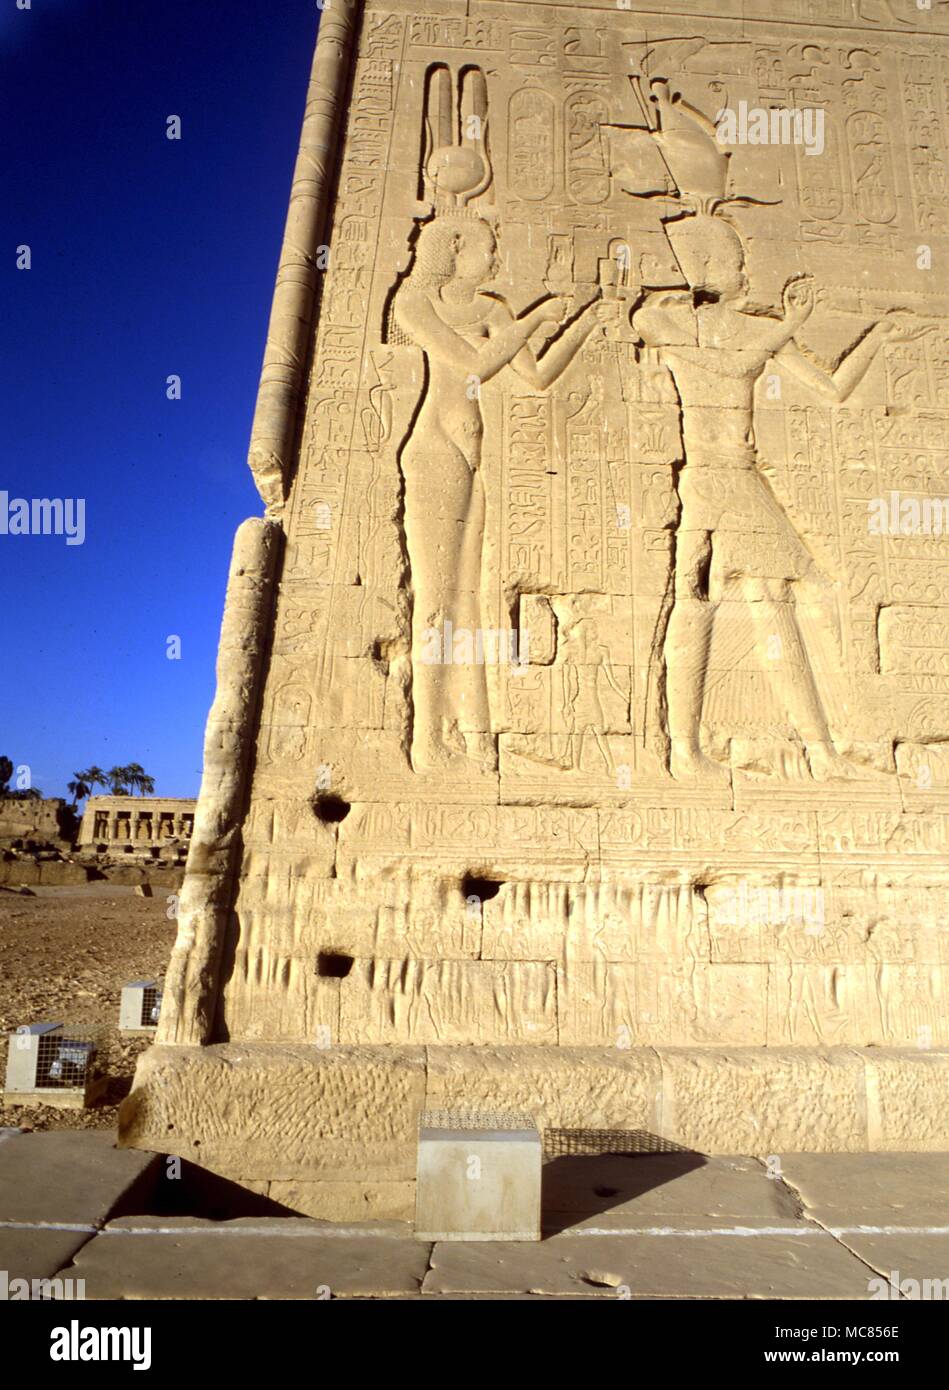 Egyptian astrology. Denderah. The Temple of Hathor Denderah, which contains a multitude of astrological planetary and zodiacal symbols Stock Photo